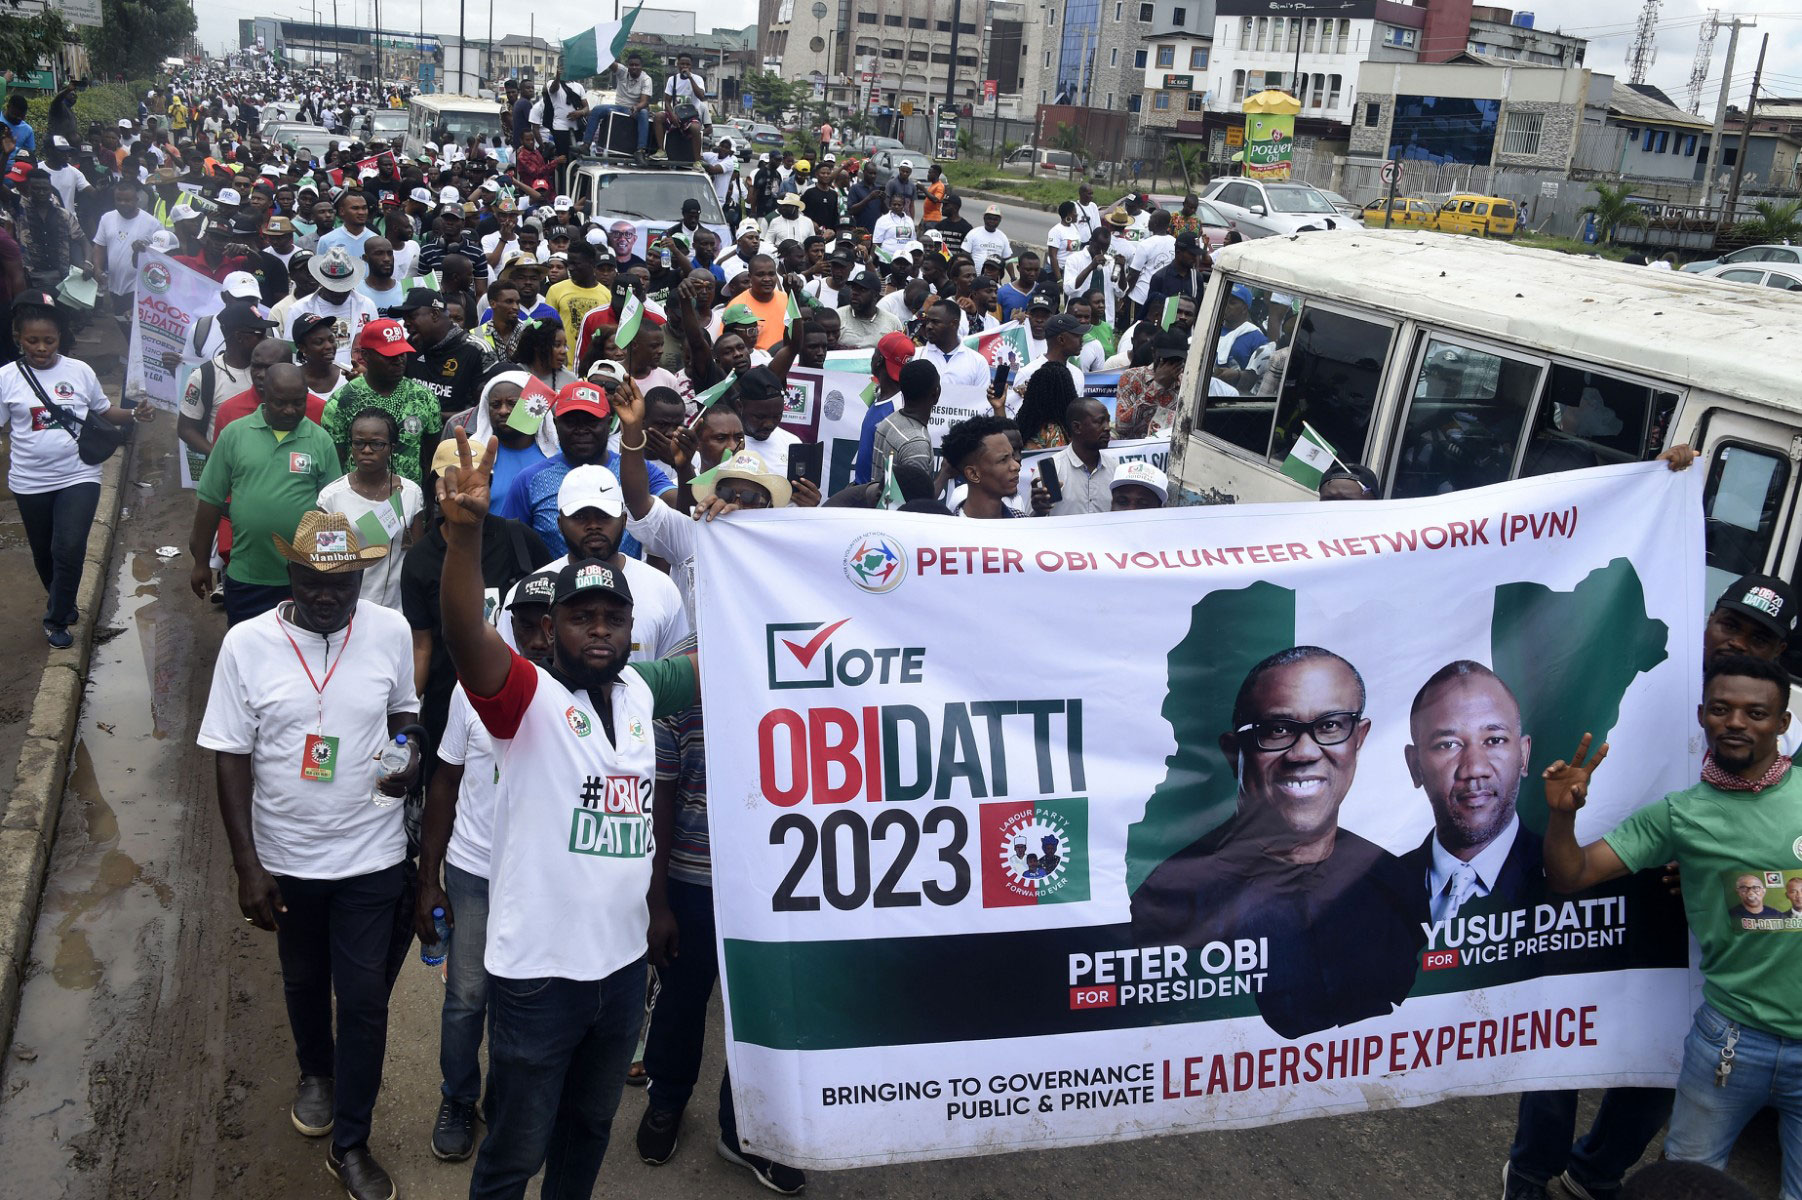 Supporters of presidential candidate of the Labour Party Peter Obi and running mate Datti Baba-Ahmed march during a campaign rally in Lagos, on October 1, 2022. (Photo by PIUS UTOMI EKPEI / AFP)